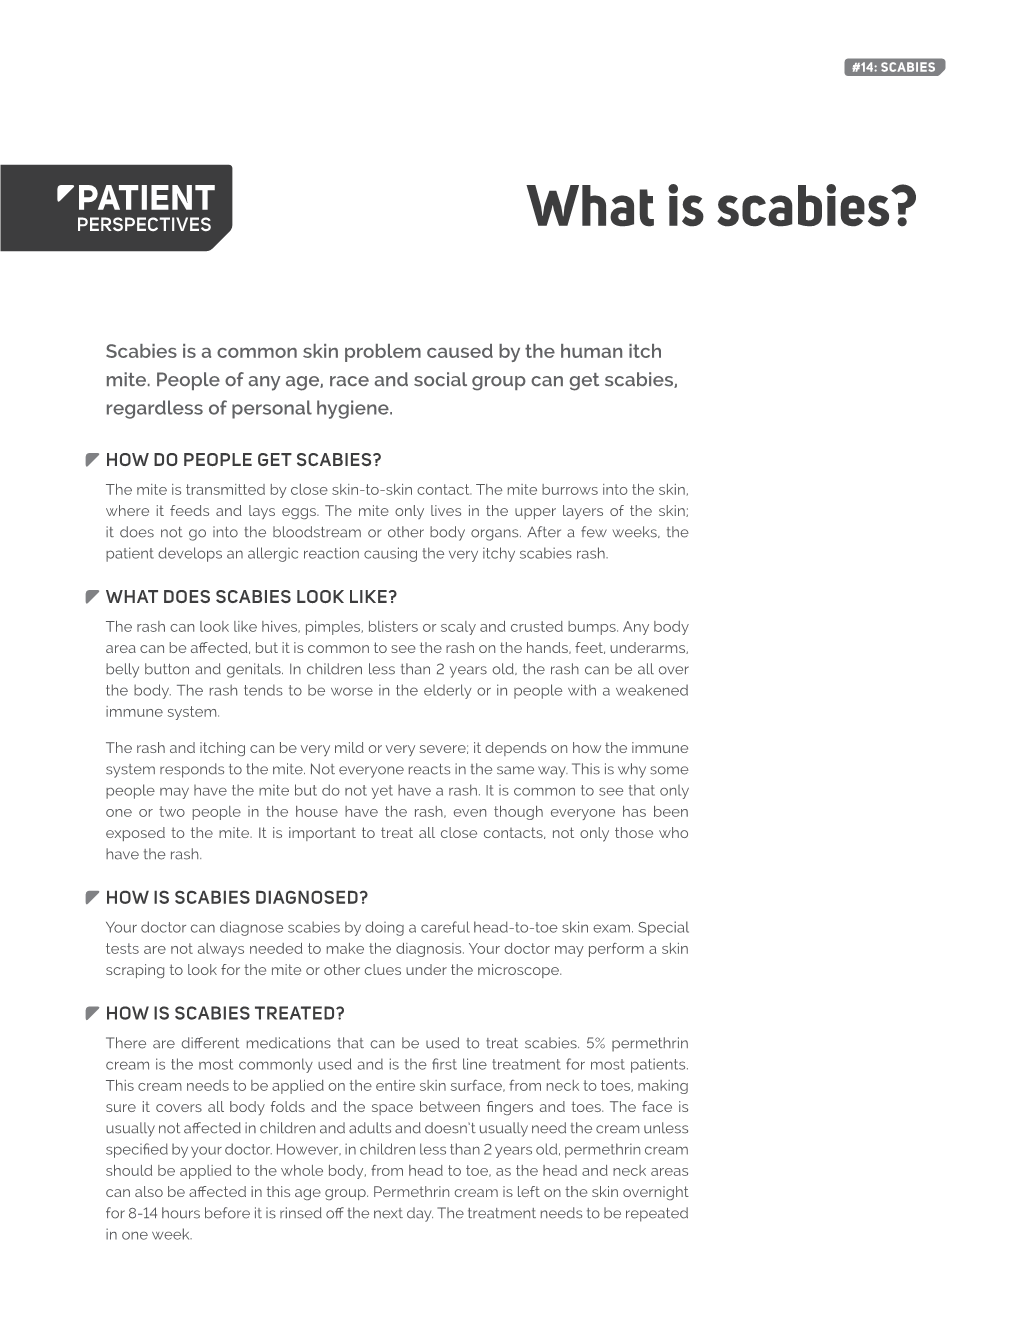 What Is Scabies?